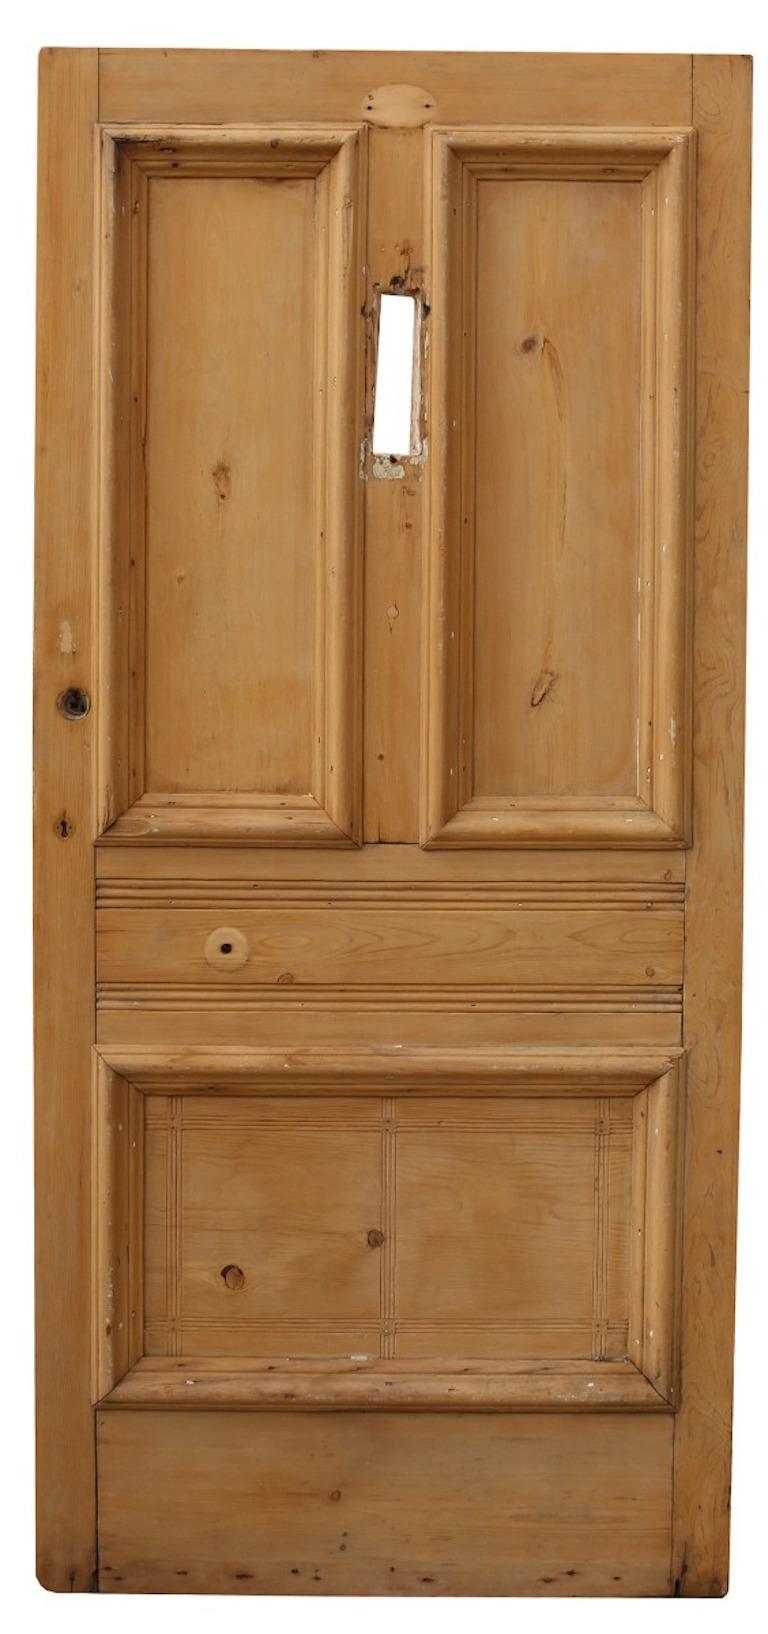 A reclaimed exterior door made from pine, with a stripped and sanded finish.